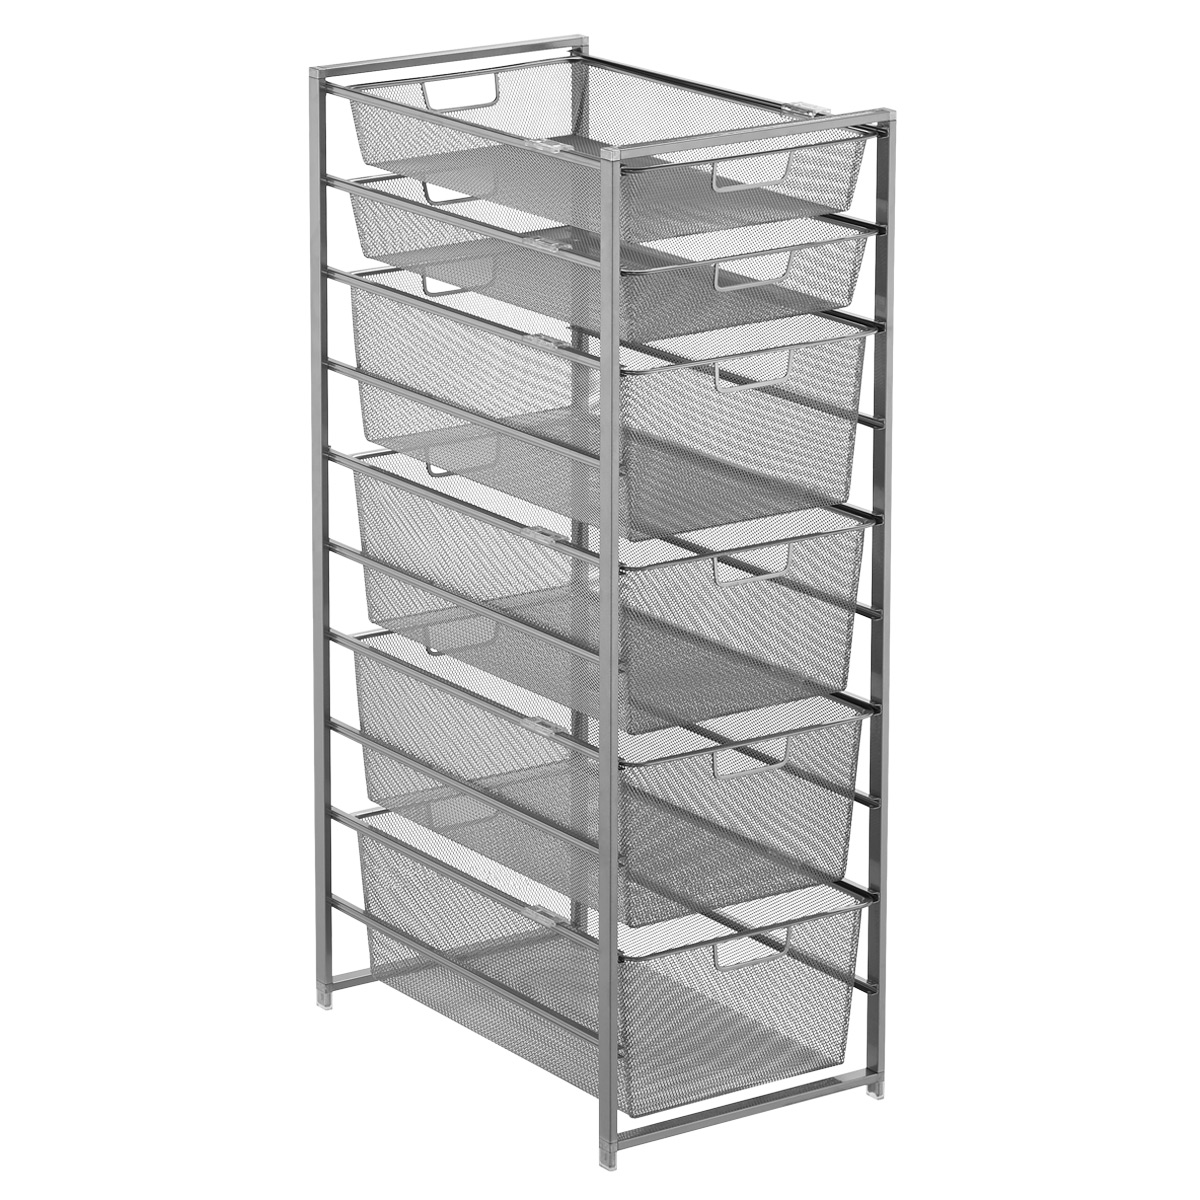 Elfa Platinum Narrow Tall Drawer Solution | The Container Store